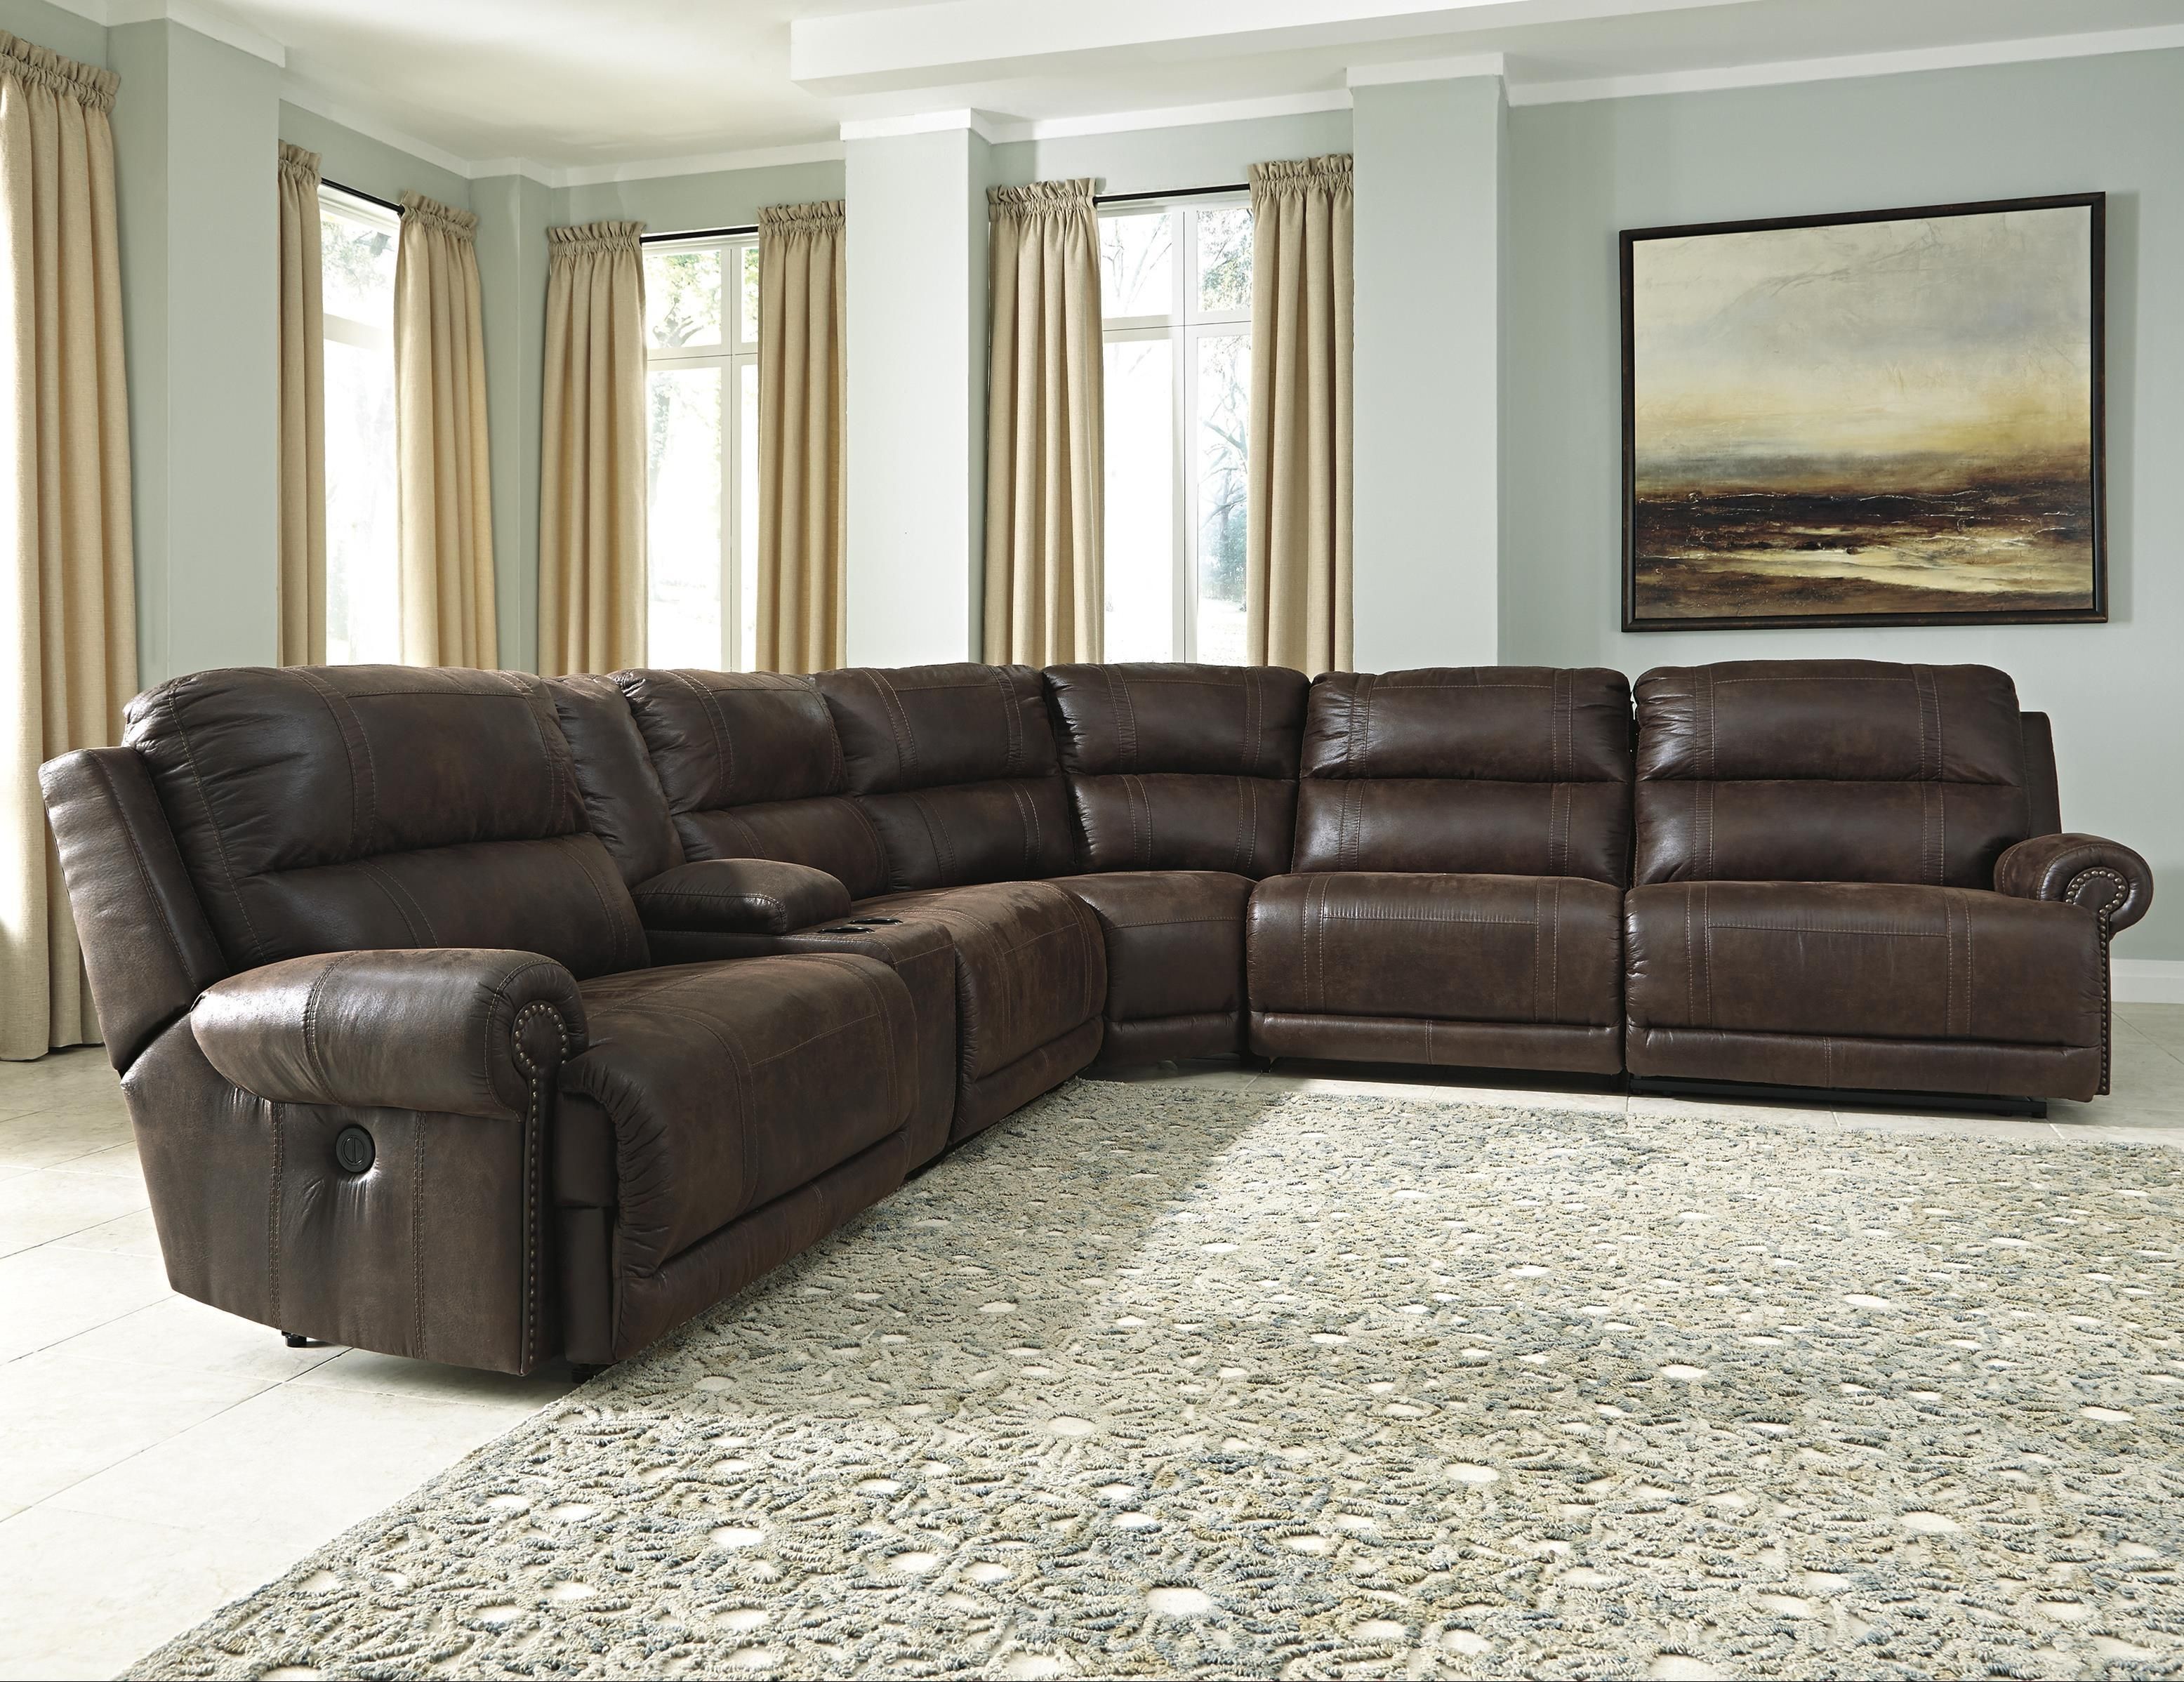 Styleline Luttrell 6 Piece Reclining Sectional With Console – Efo For 6 Piece Leather Sectional Sofa (View 5 of 15)